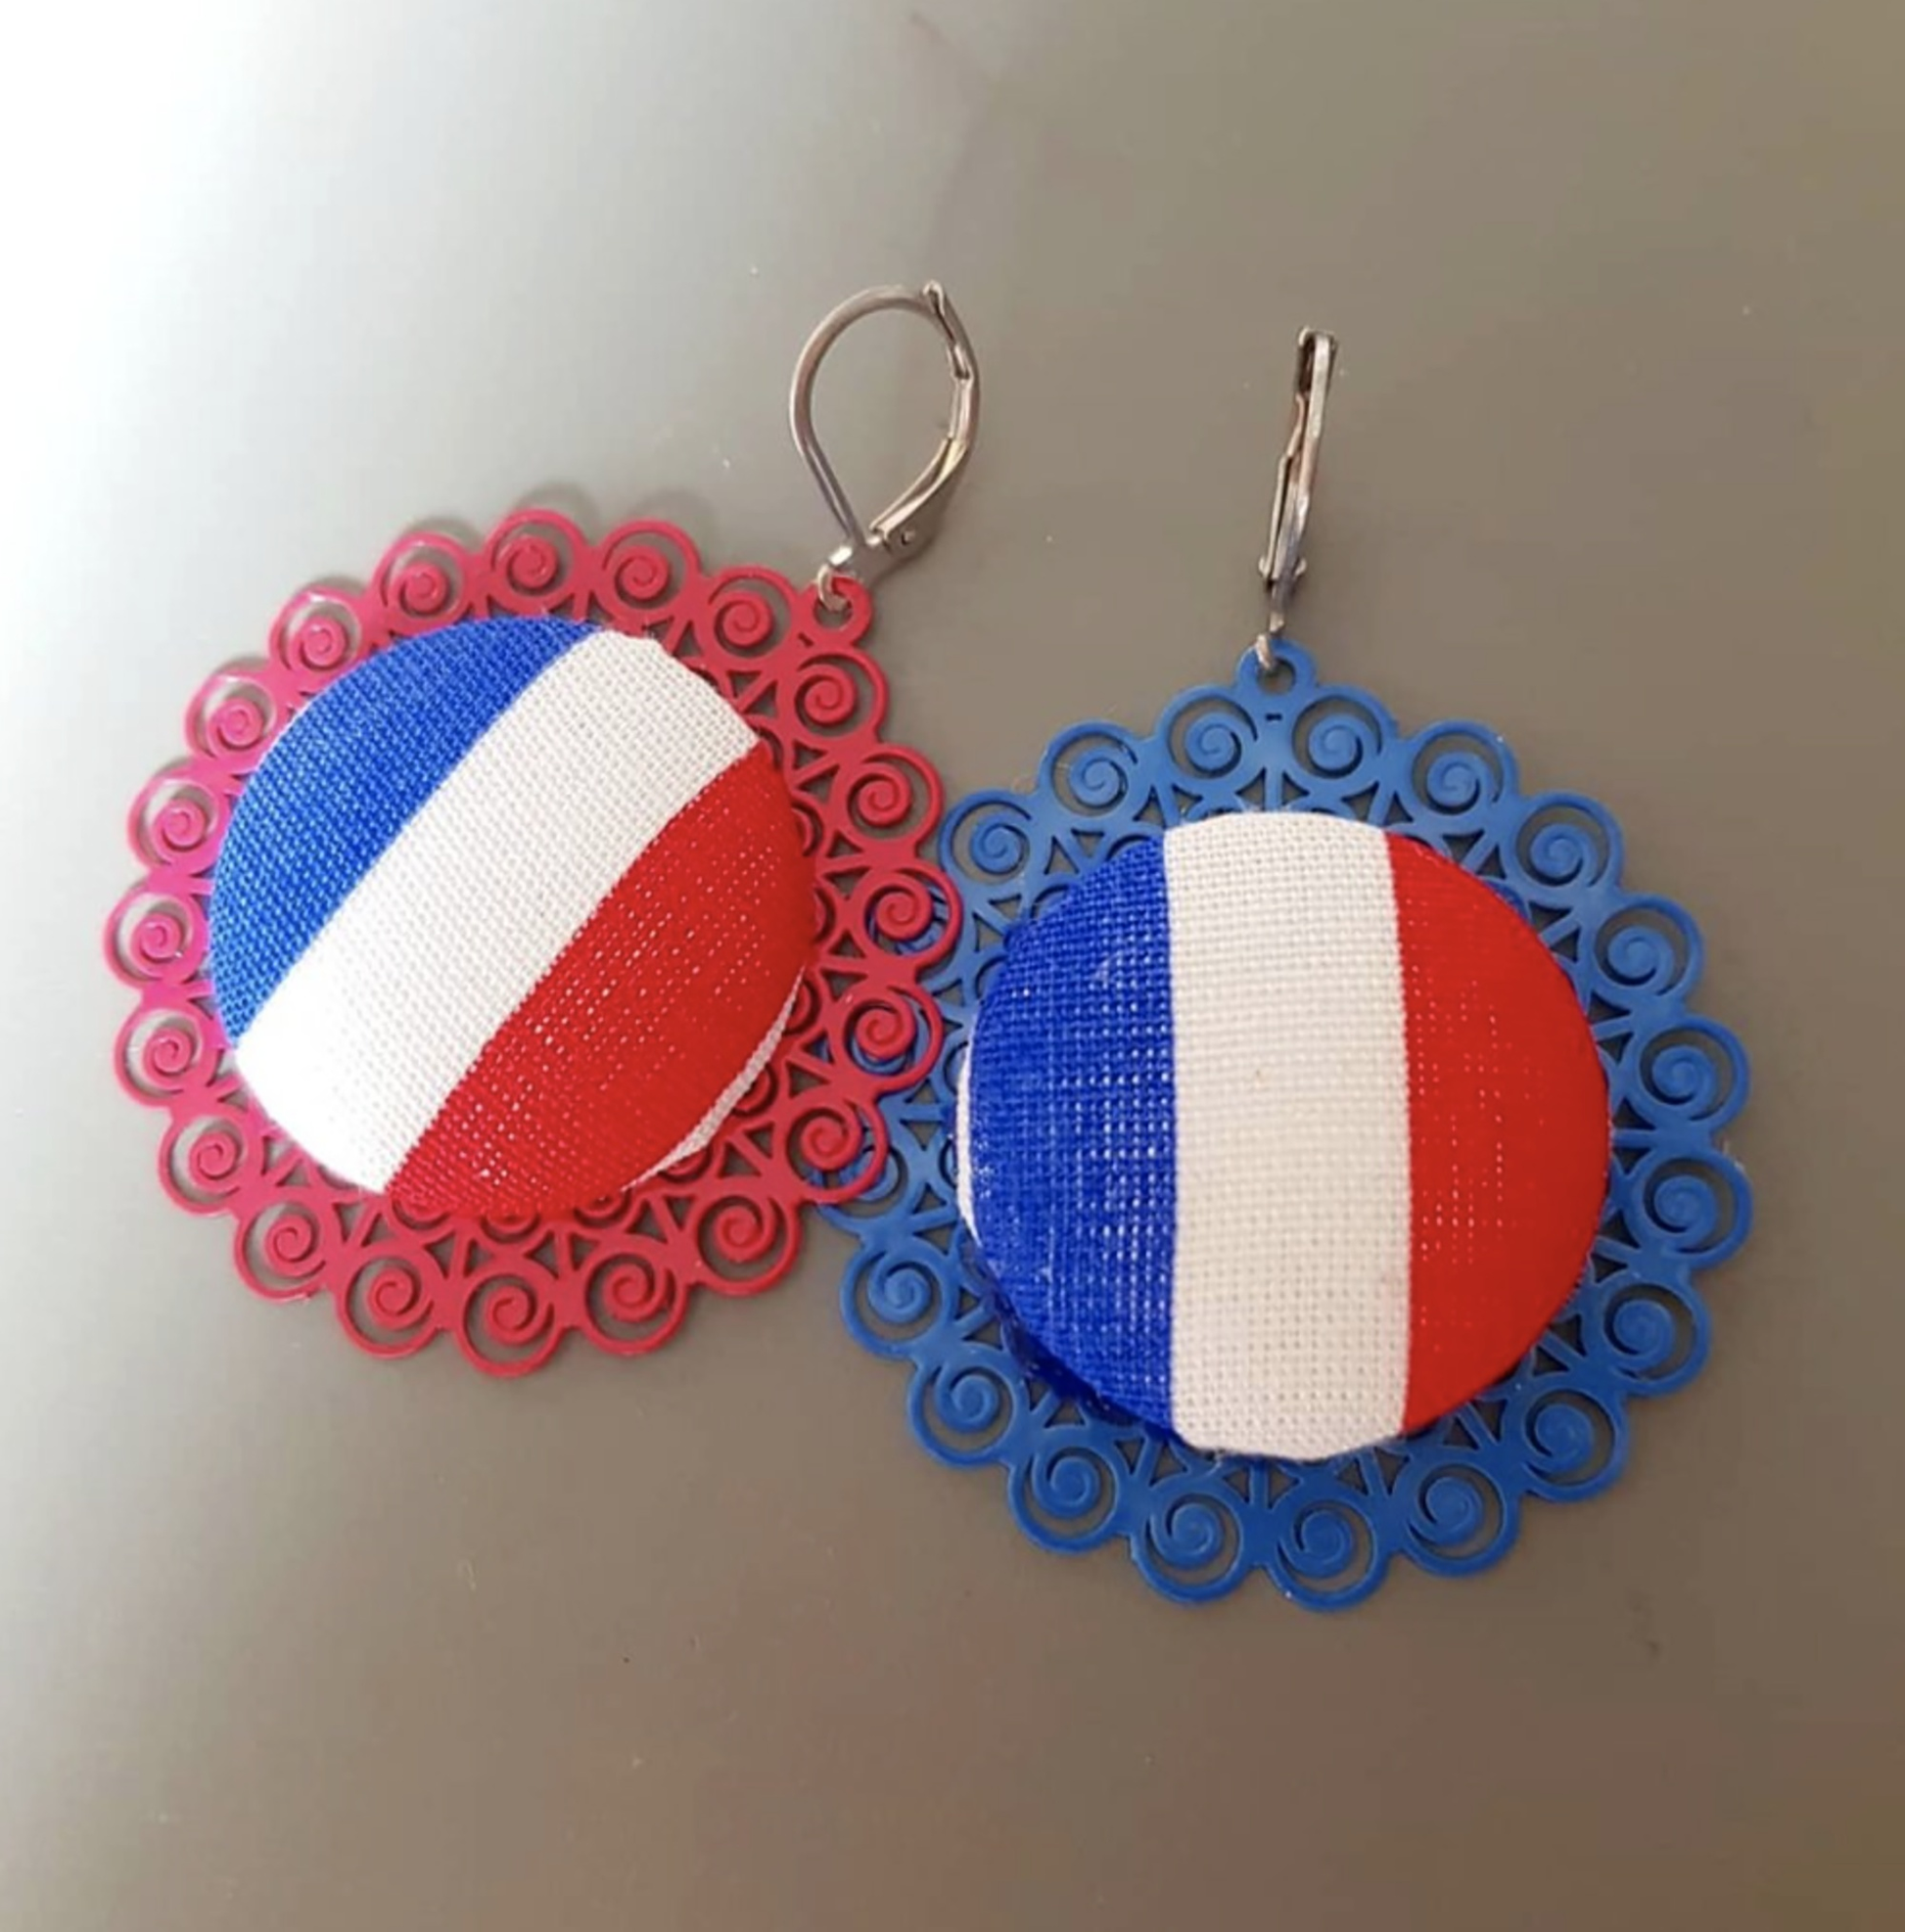 "Get Ready to Cheer: Festive French Flag Earrings for Olympic Season"